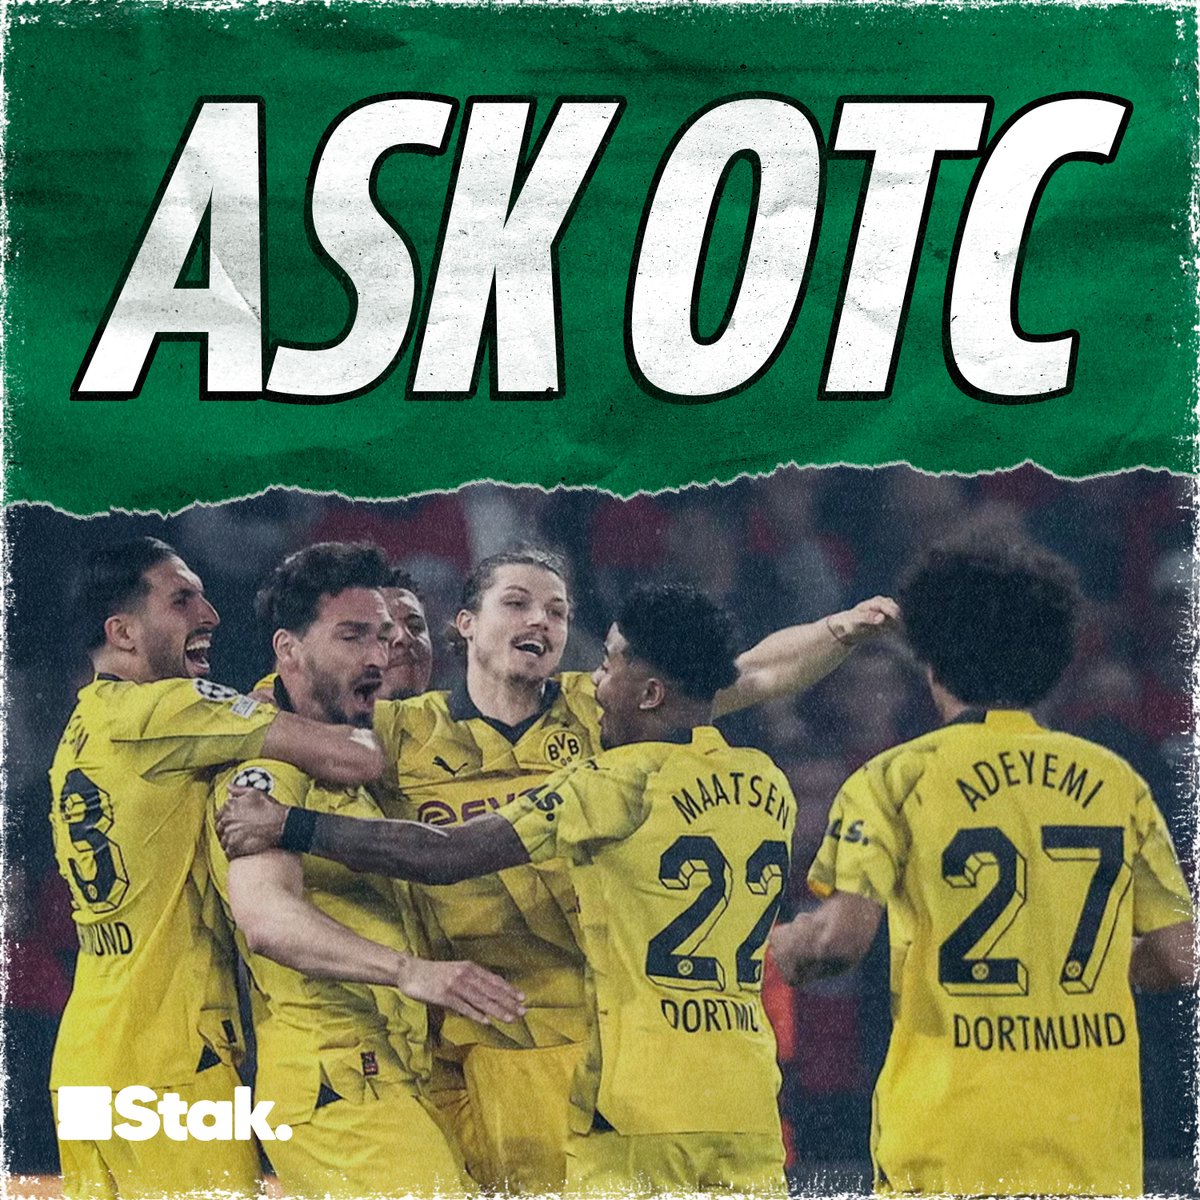 It's been another amazing week on the continent 😱 @andybrassell, @NickyBandini and @davidjaca will be here to unpack it all on this week's Ask OTC! Send in your questions 👇